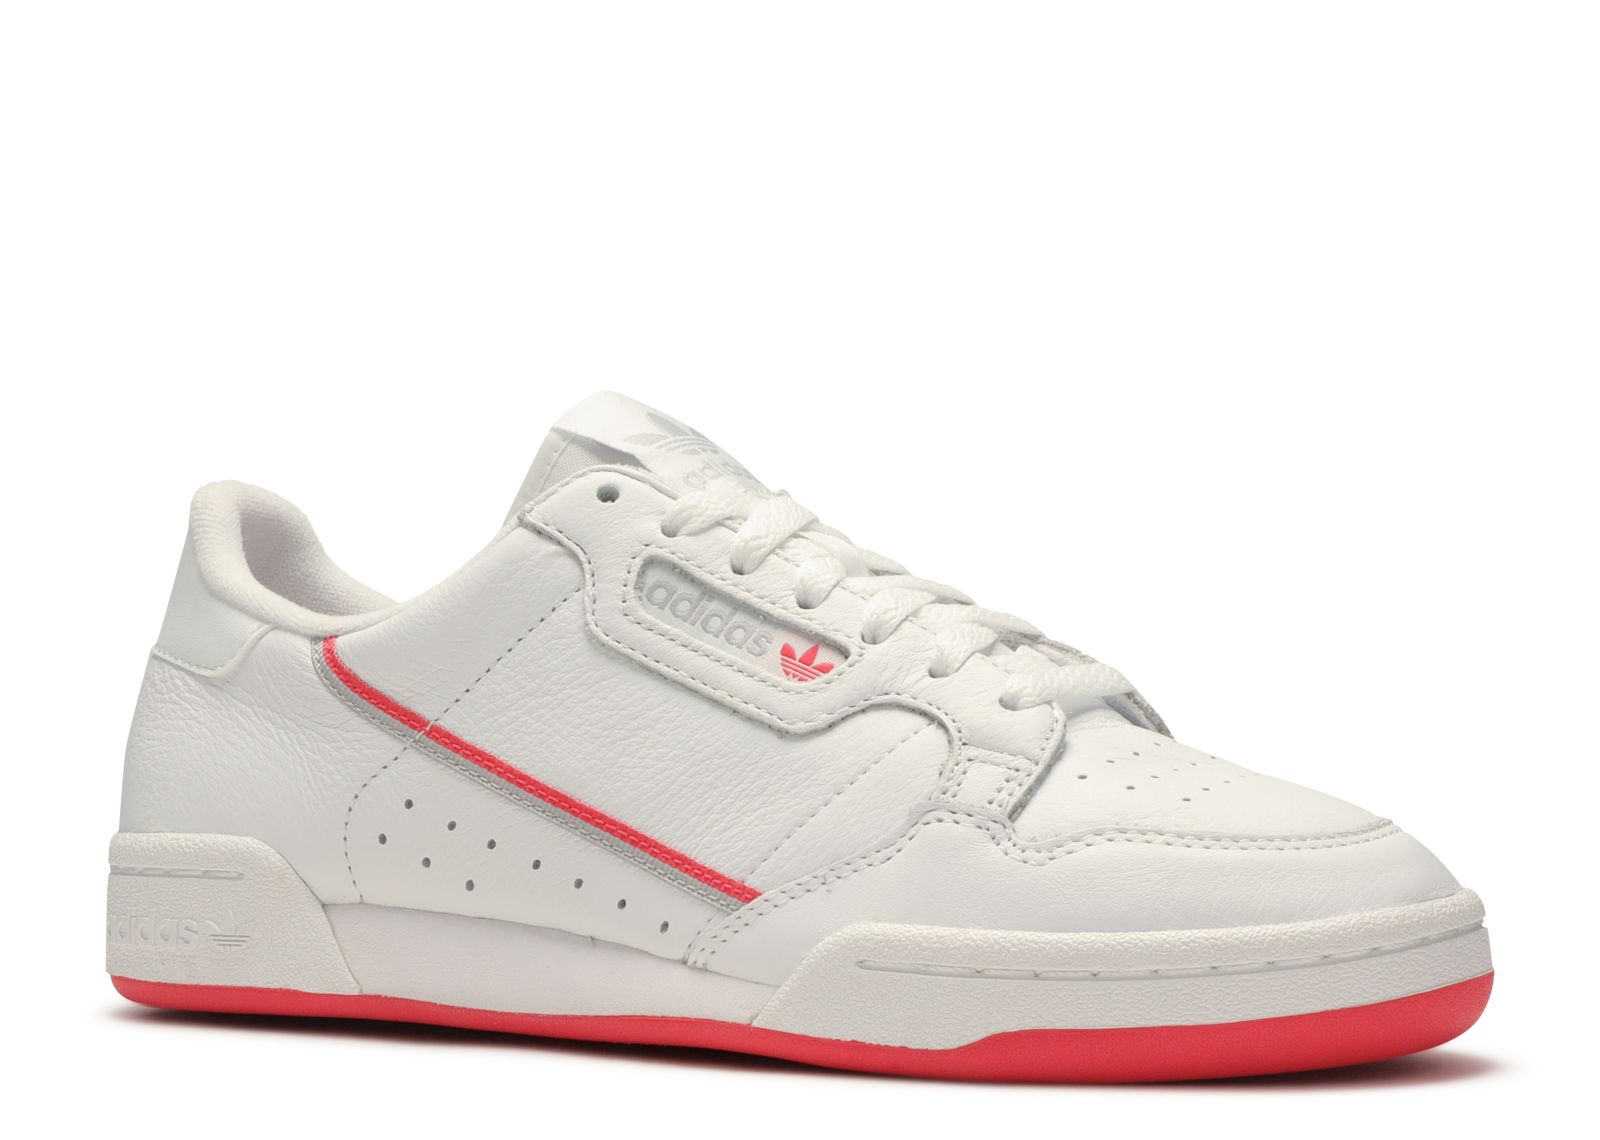 adidas continental 80 shock red